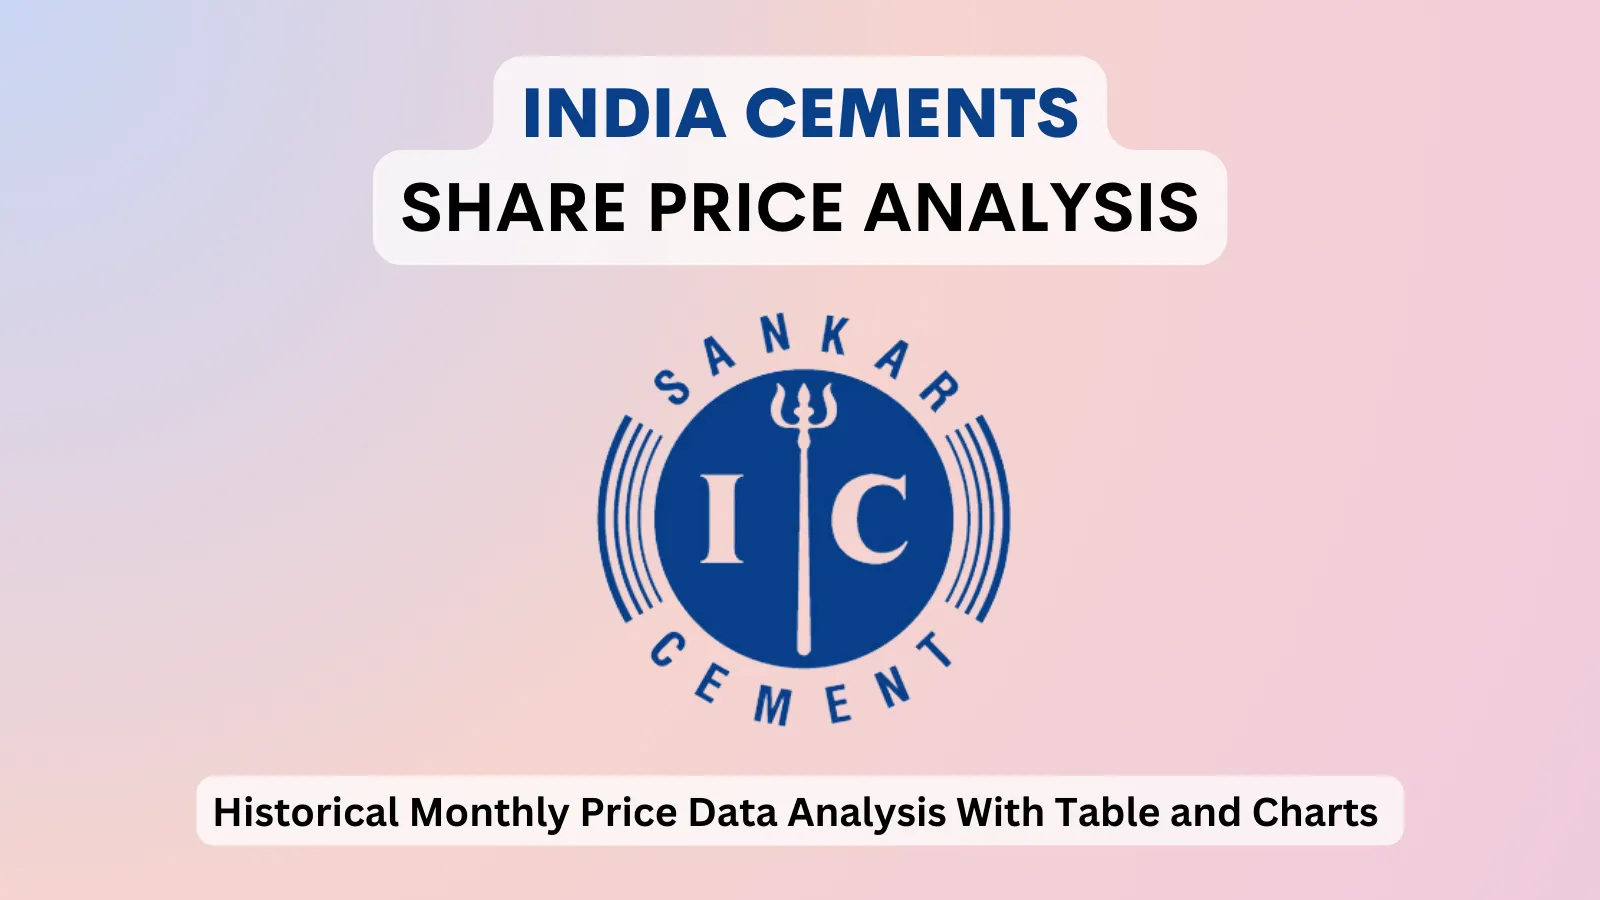 India Cements share price analysis 1